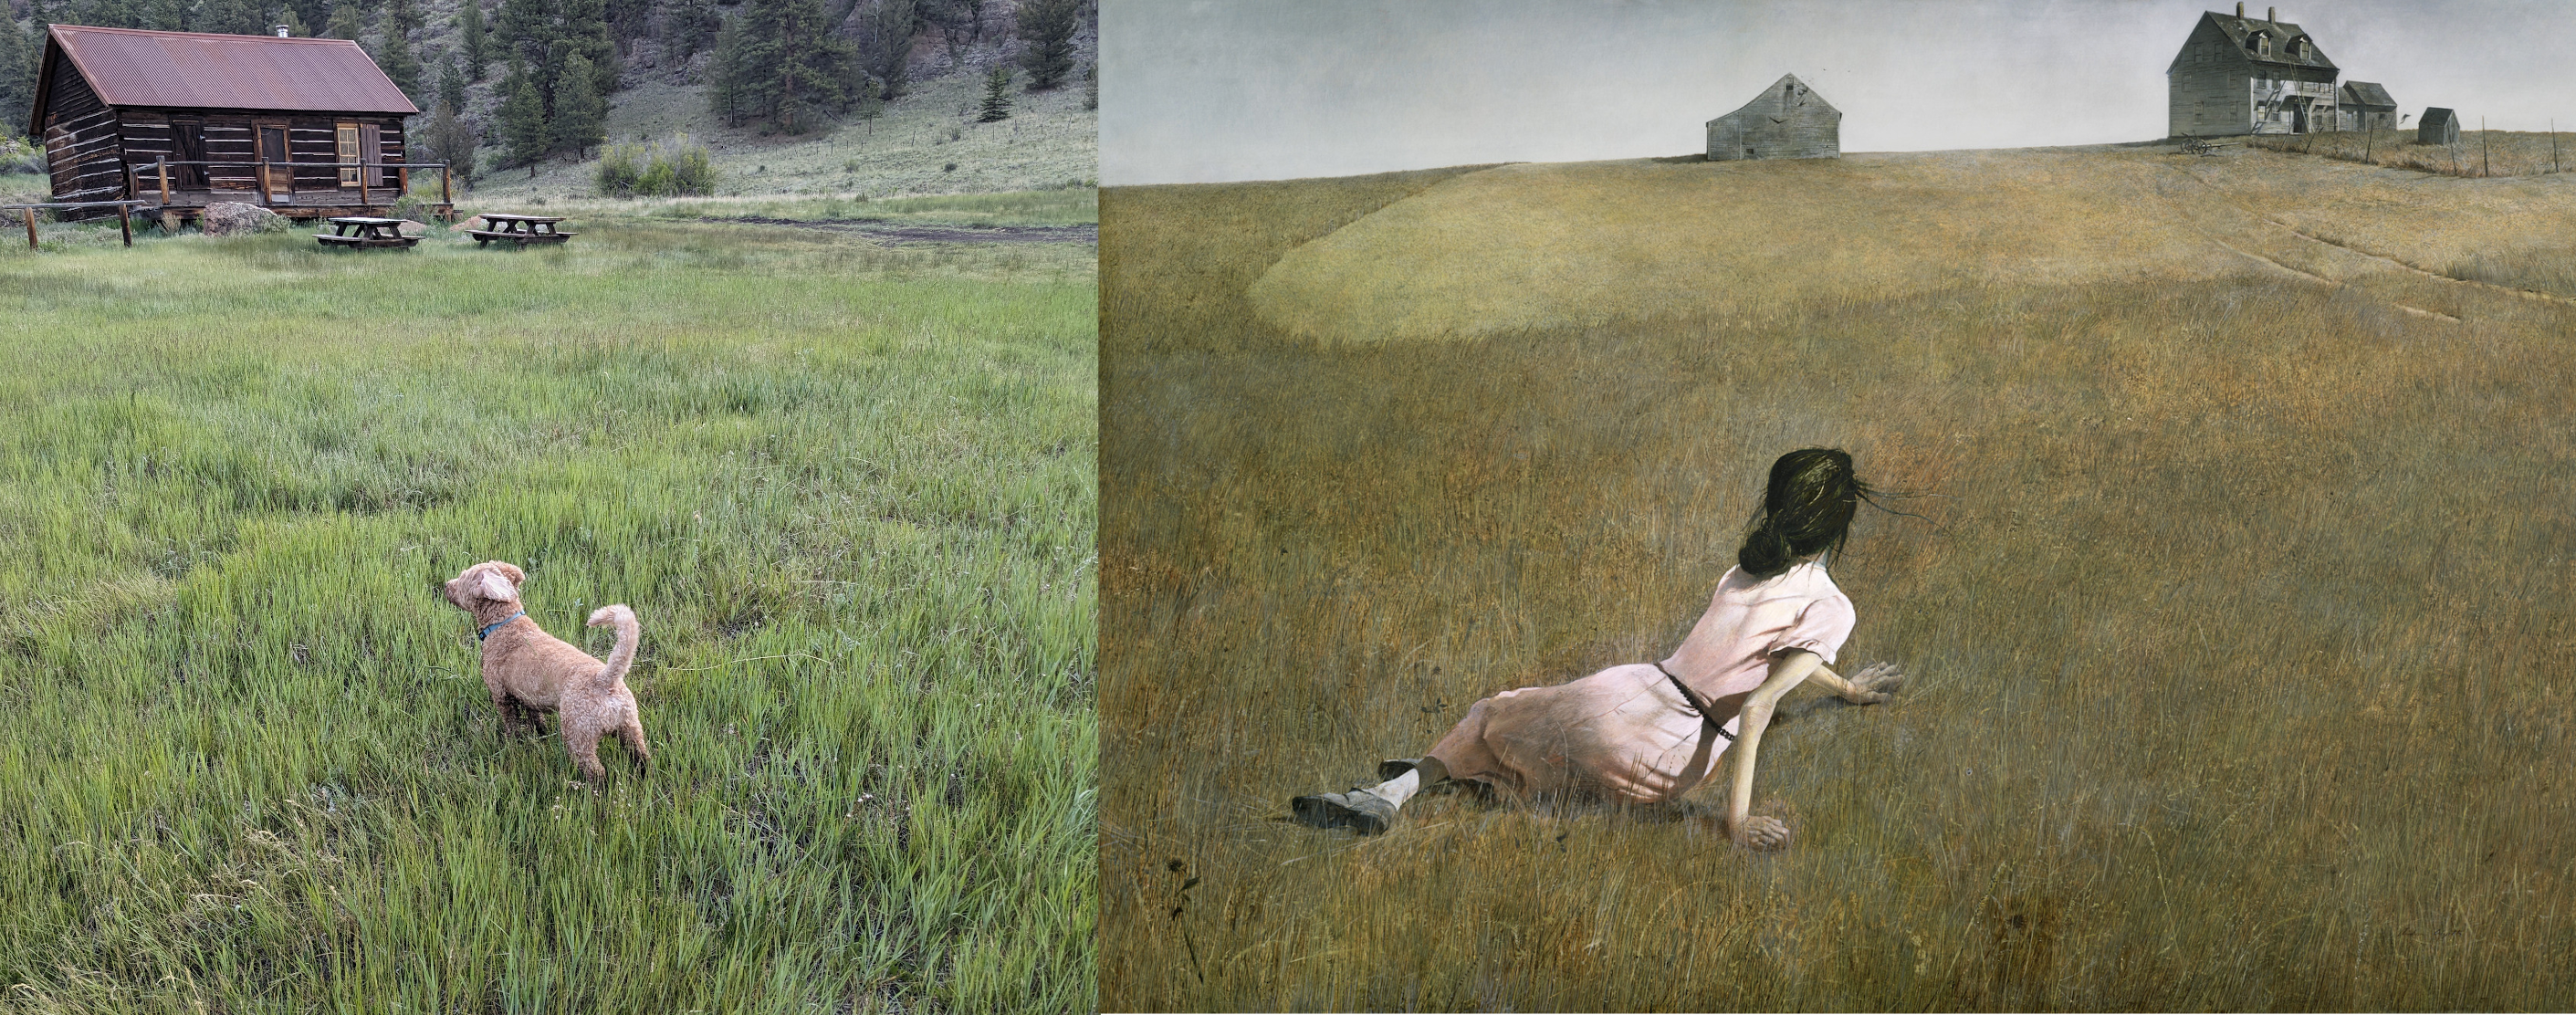 an image of a dog in a field compared to to an Andrew Wyeth painting